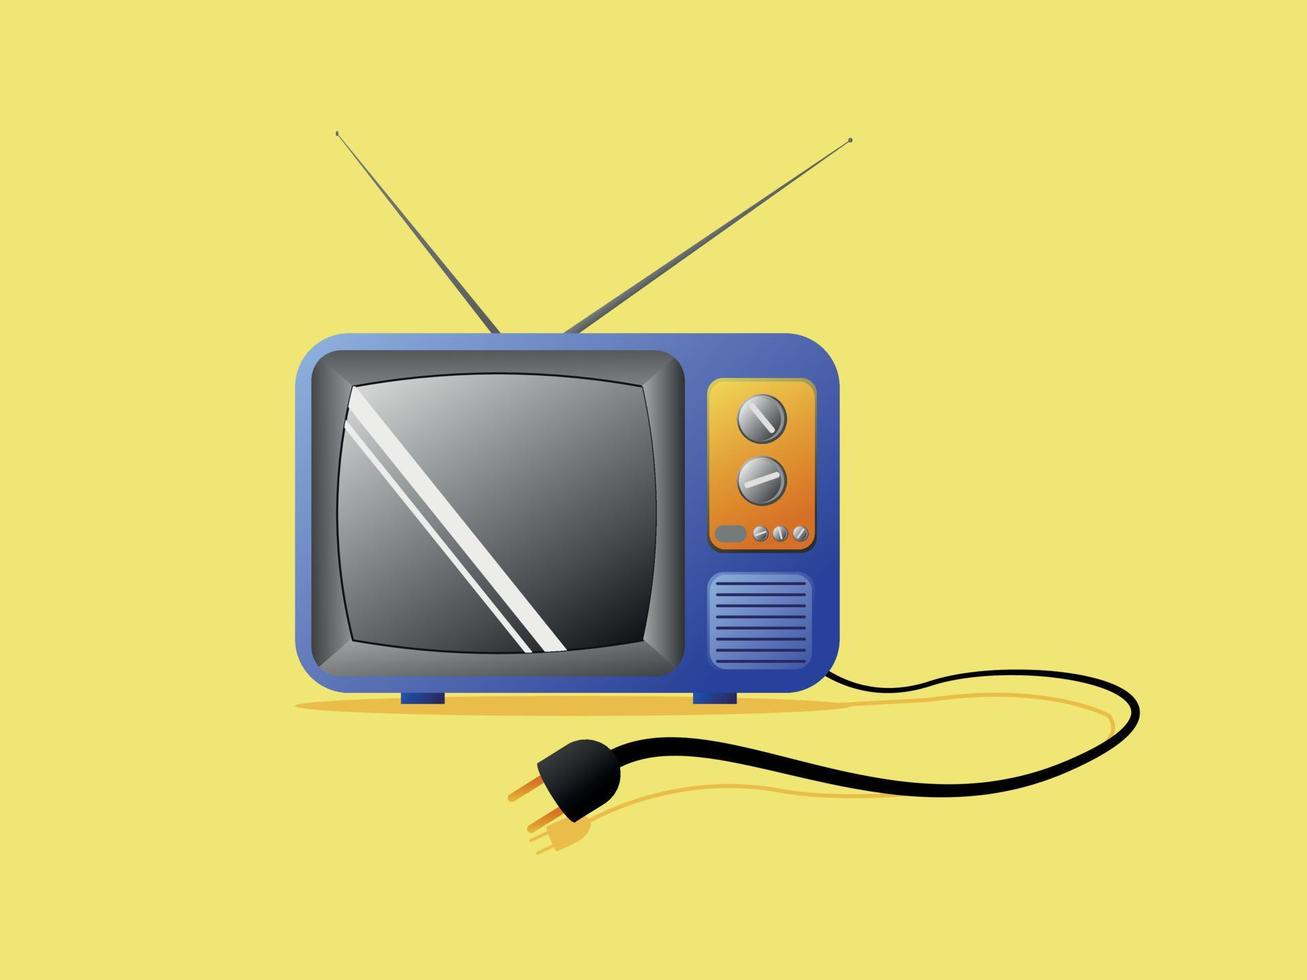 illustration of 3d vintage TV box with antenna, cable, and shiny screen vector icon design best for web icon, mobile apps, vintage collection